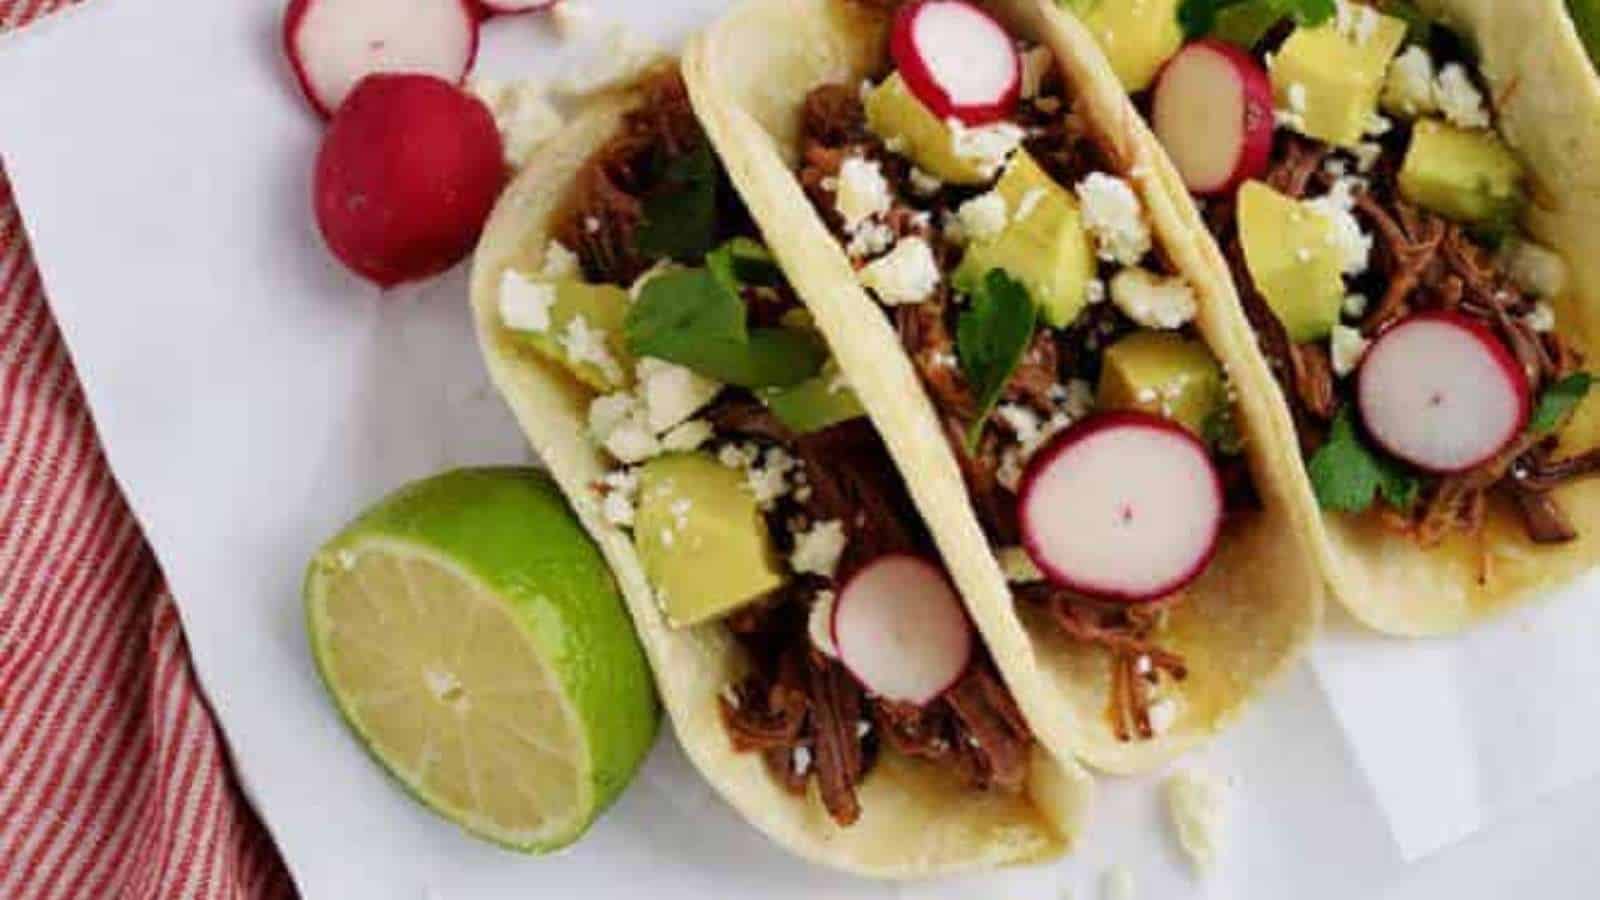 Pulled pork tacos with radishes and limes.